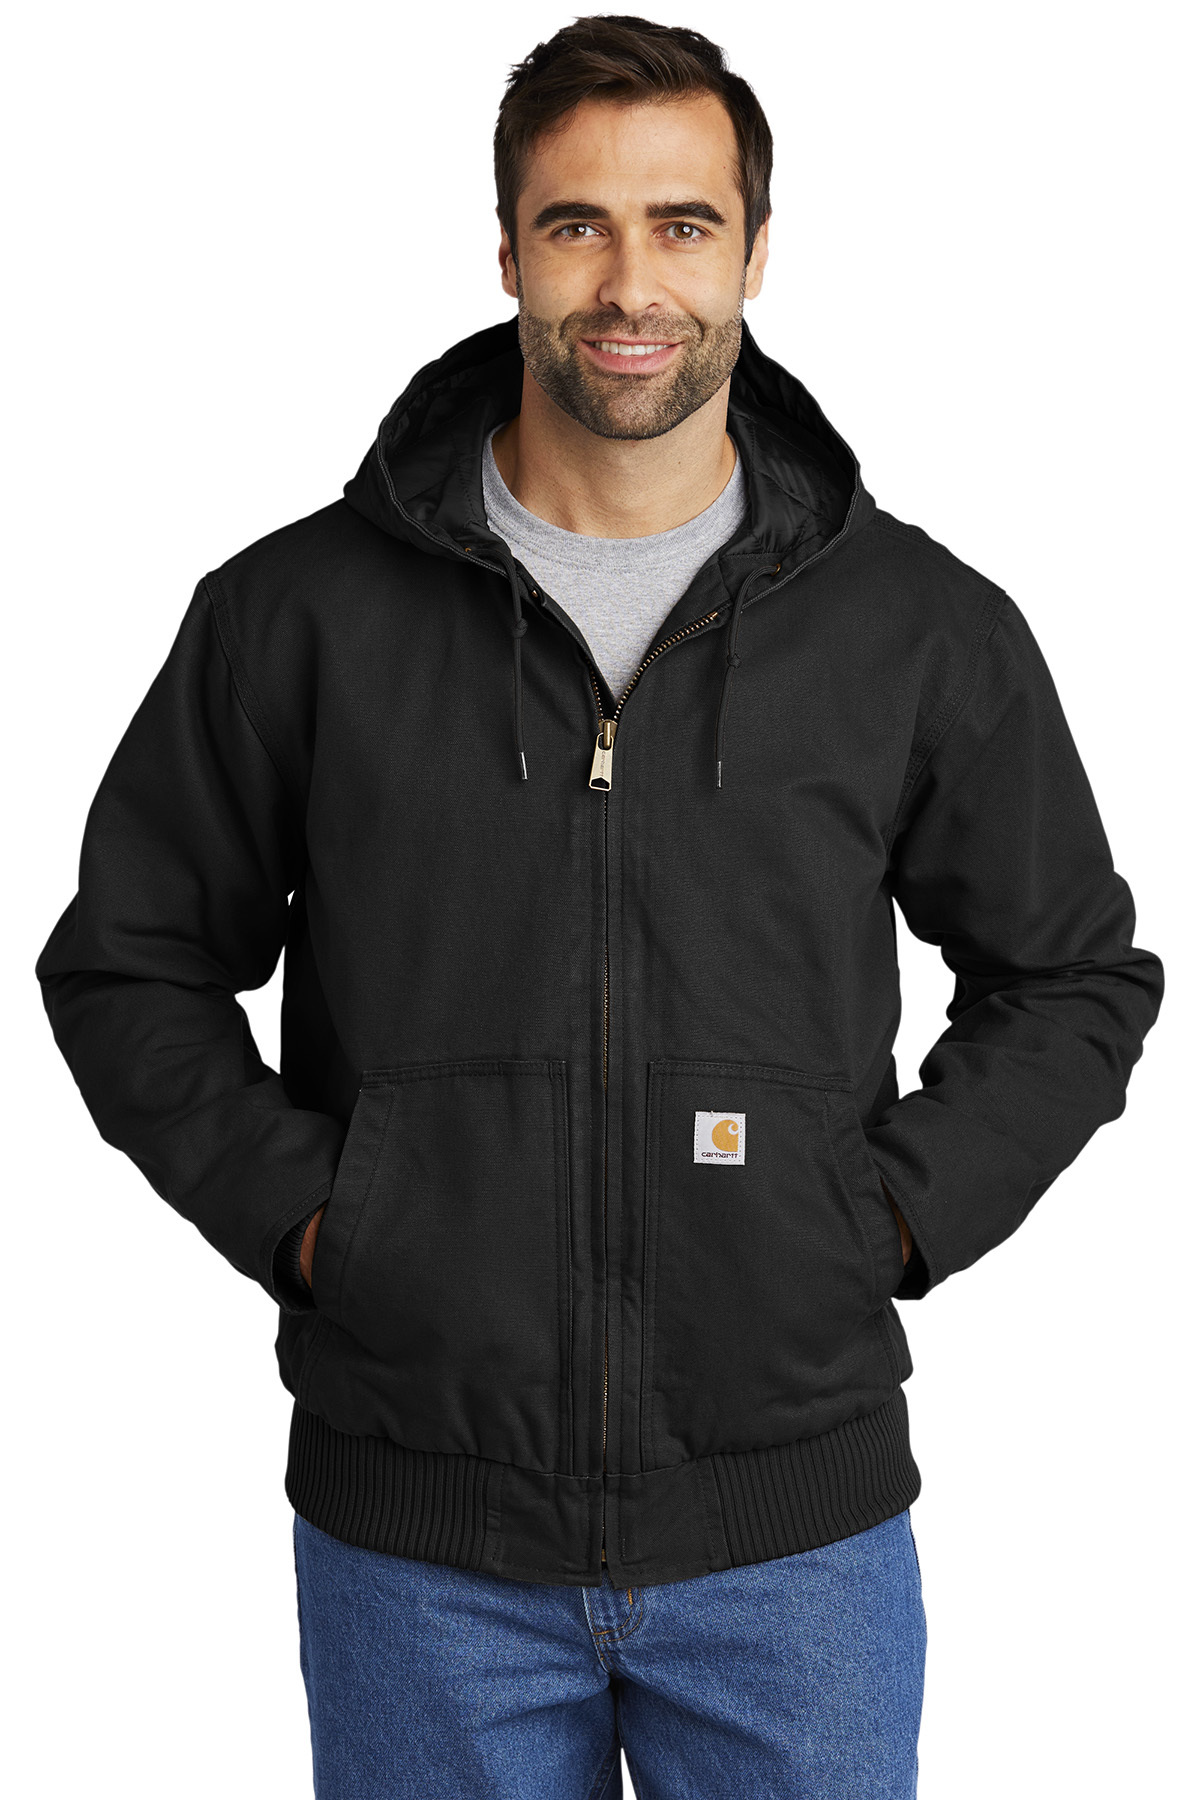 Carhartt Tall Washed Duck Active Jac | Product | Company Casuals